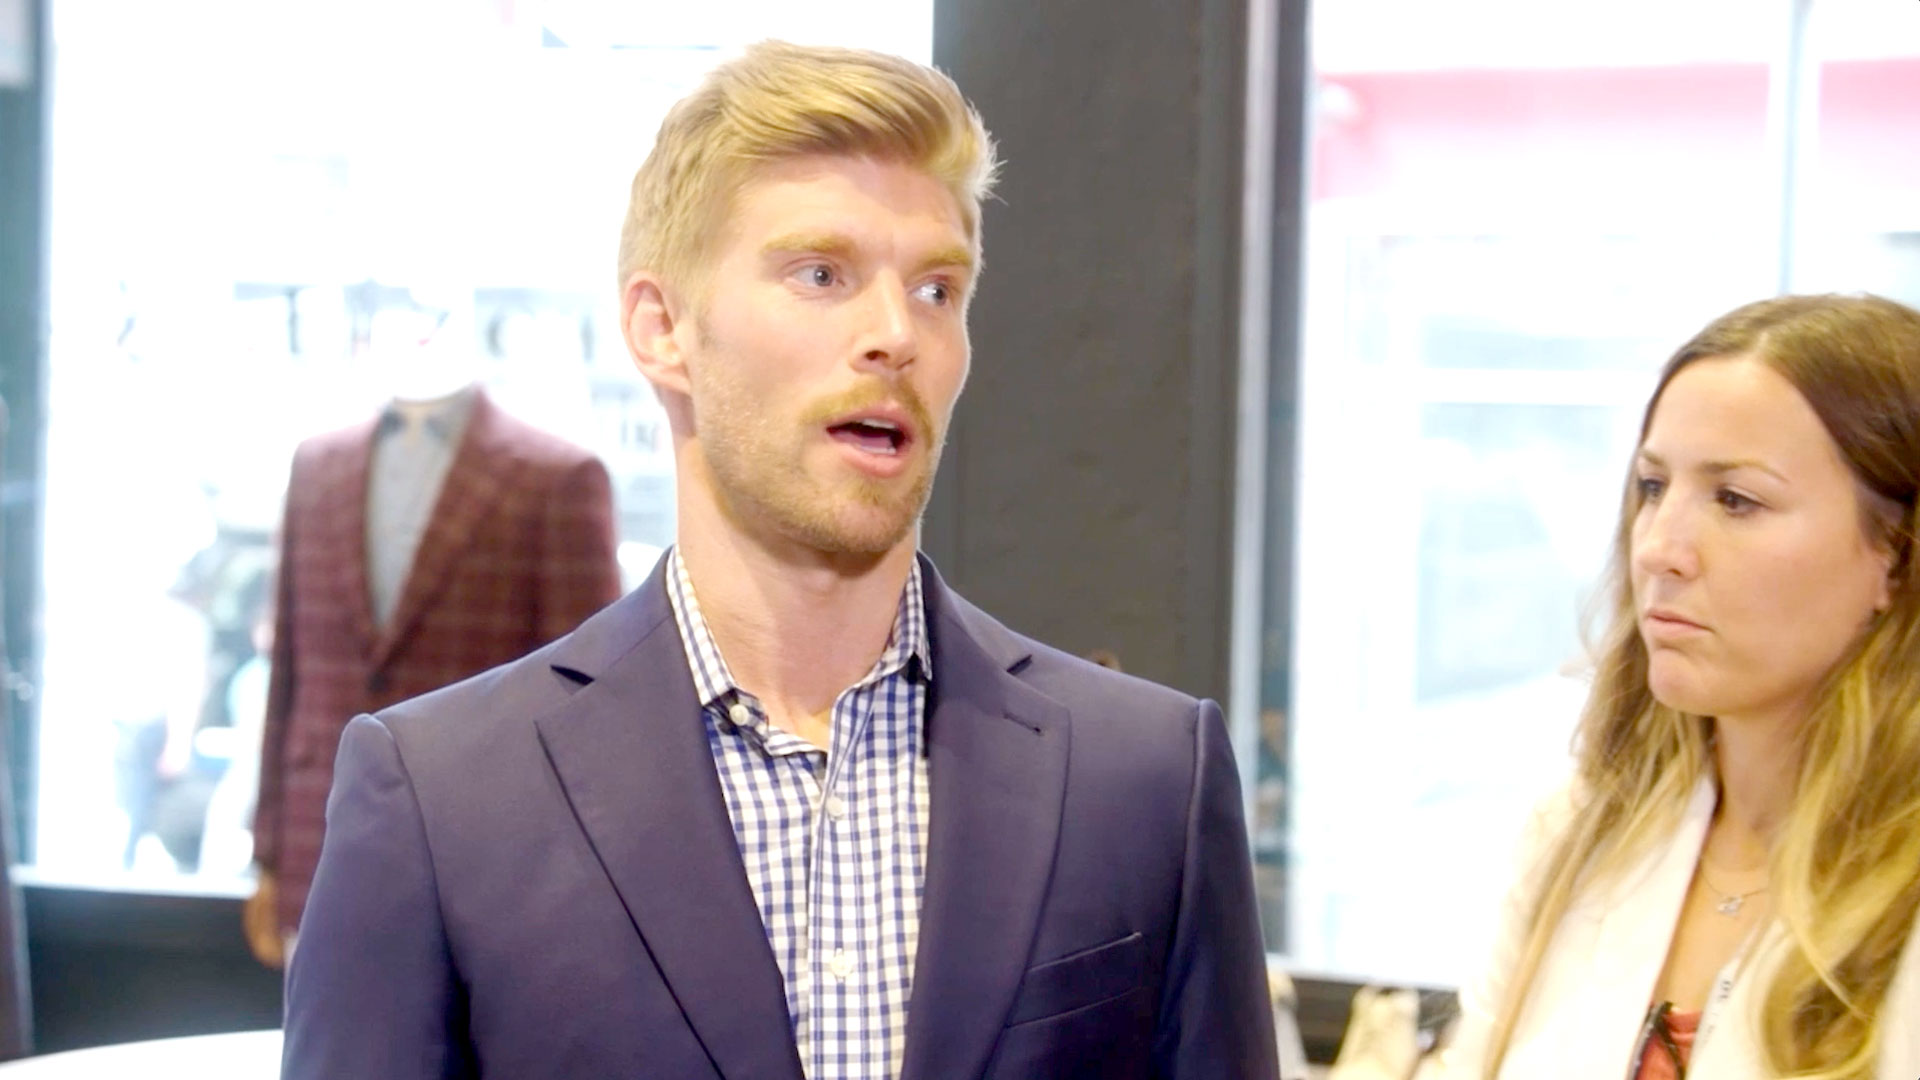 Go Behind the Scenes at Kyle Cooke's Wedding Tux Fitting